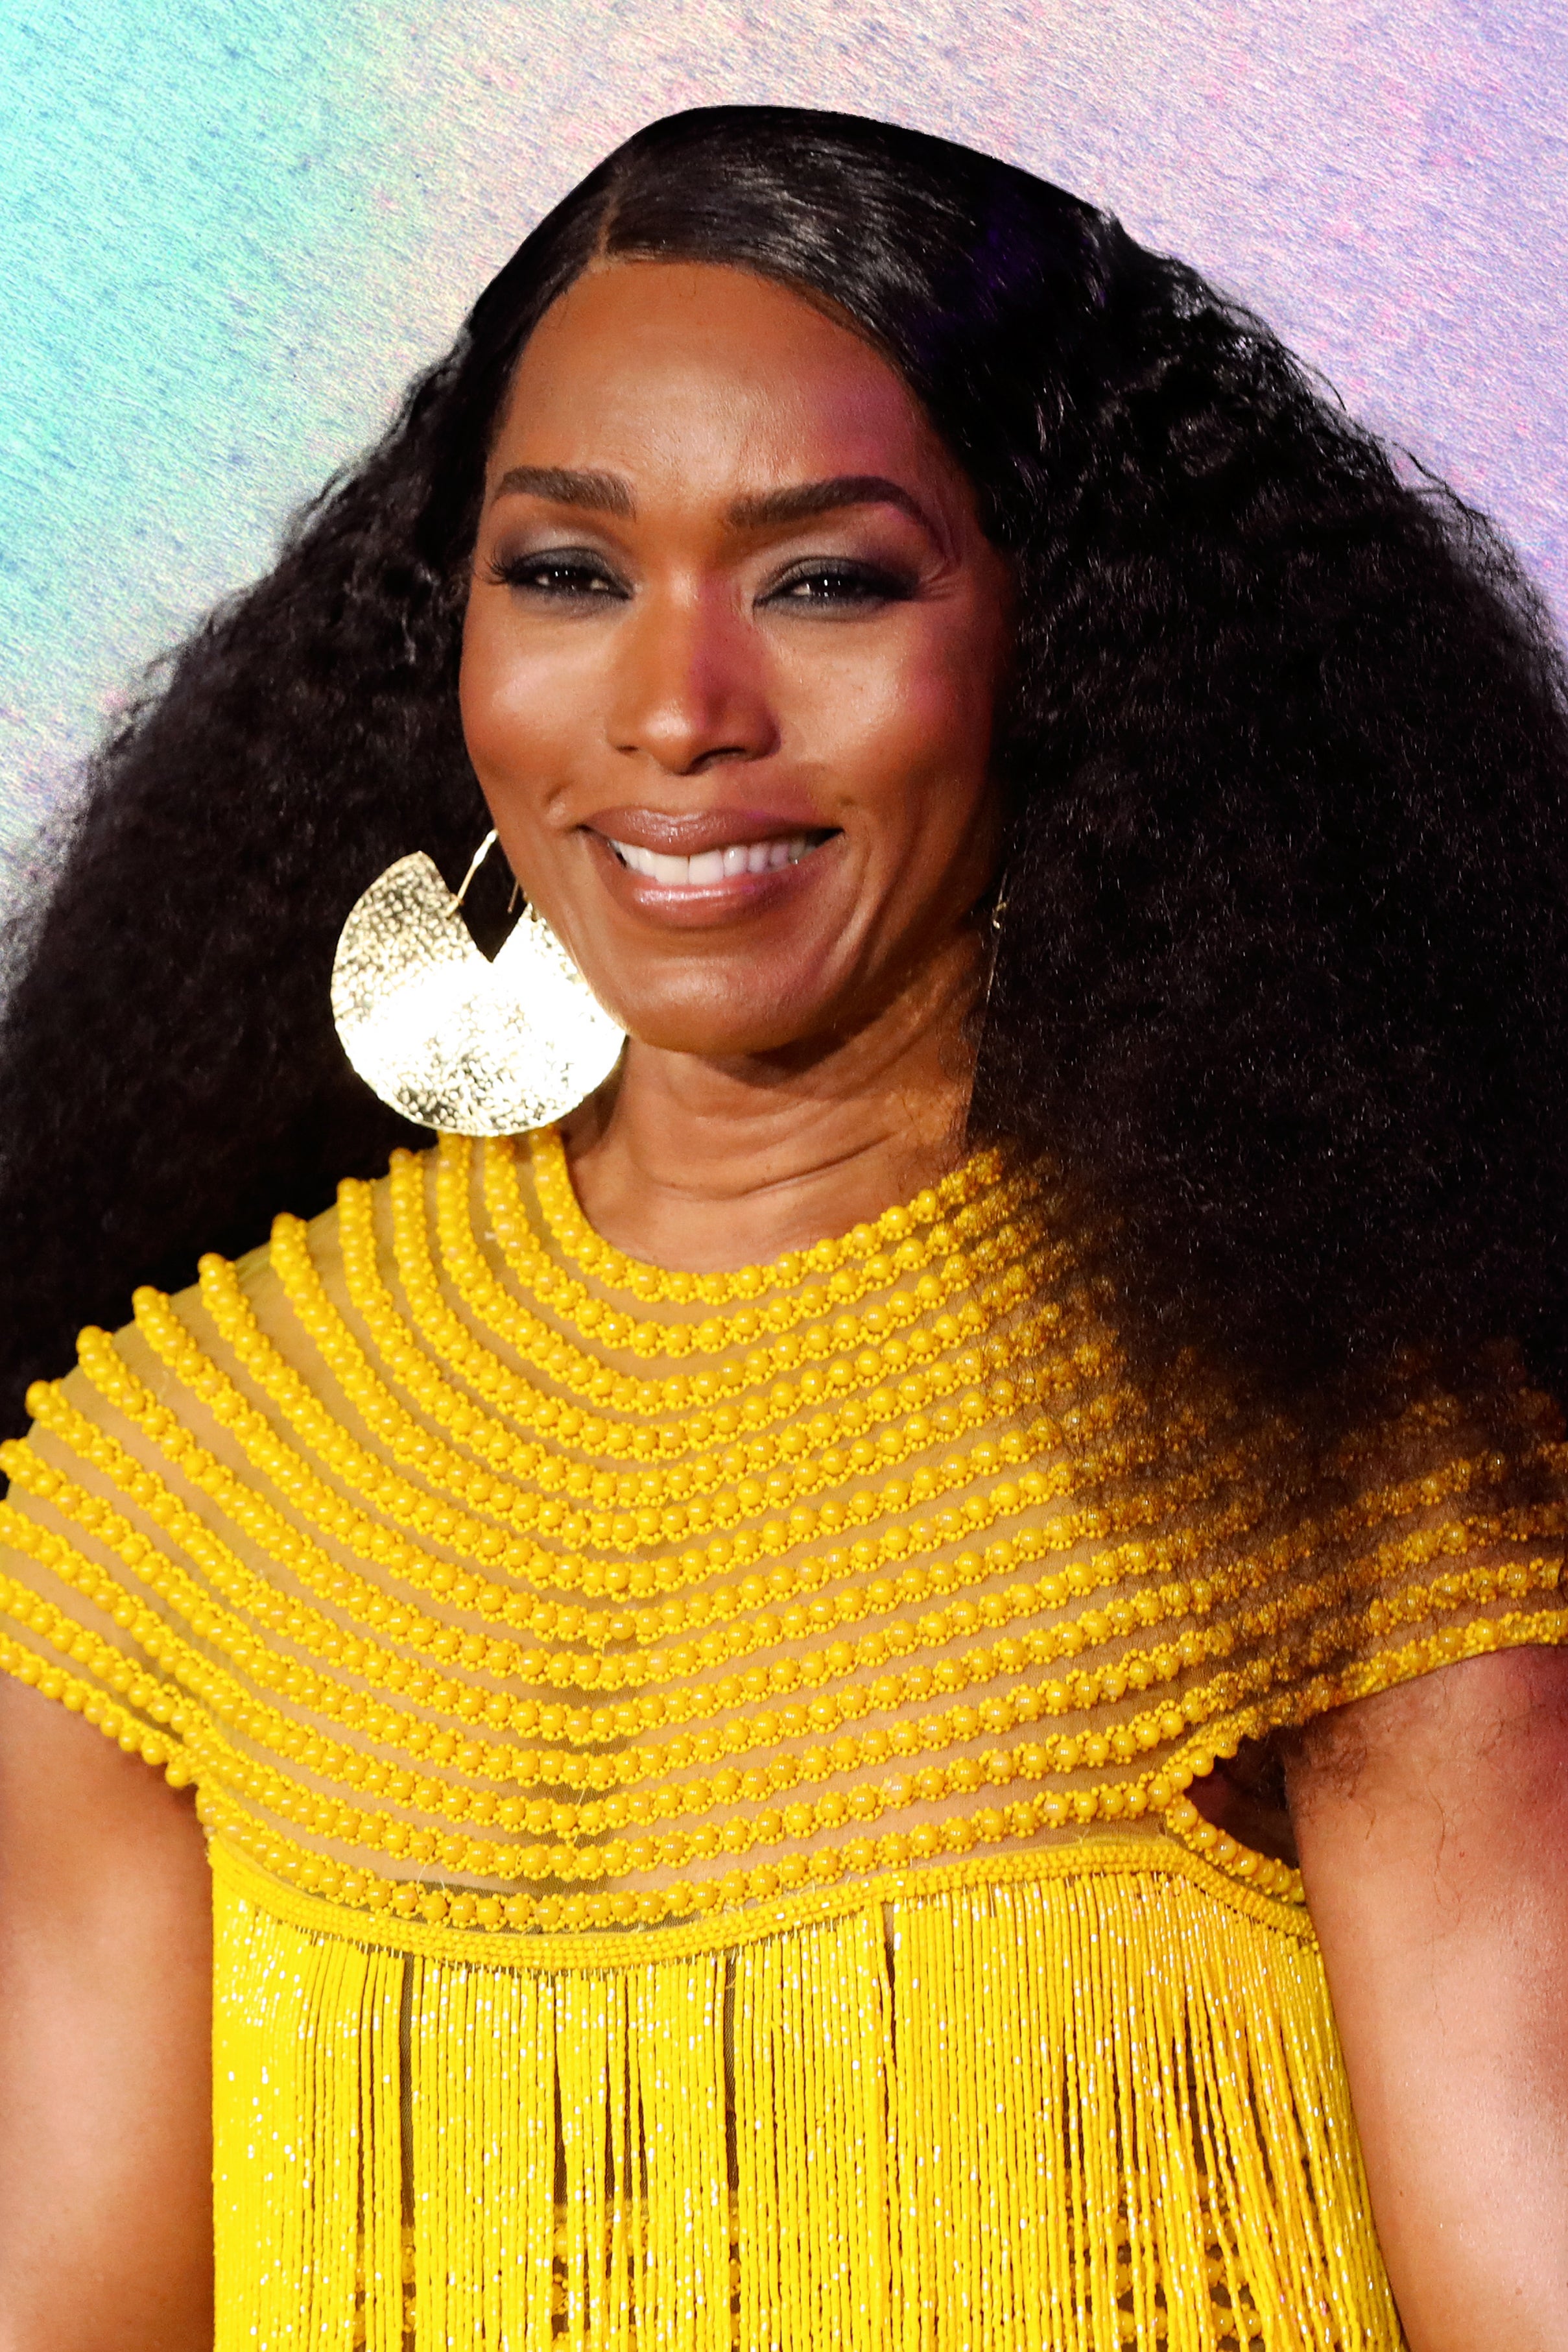 Angela Bassett Glows On The 'Black Panther' Red Carpet
